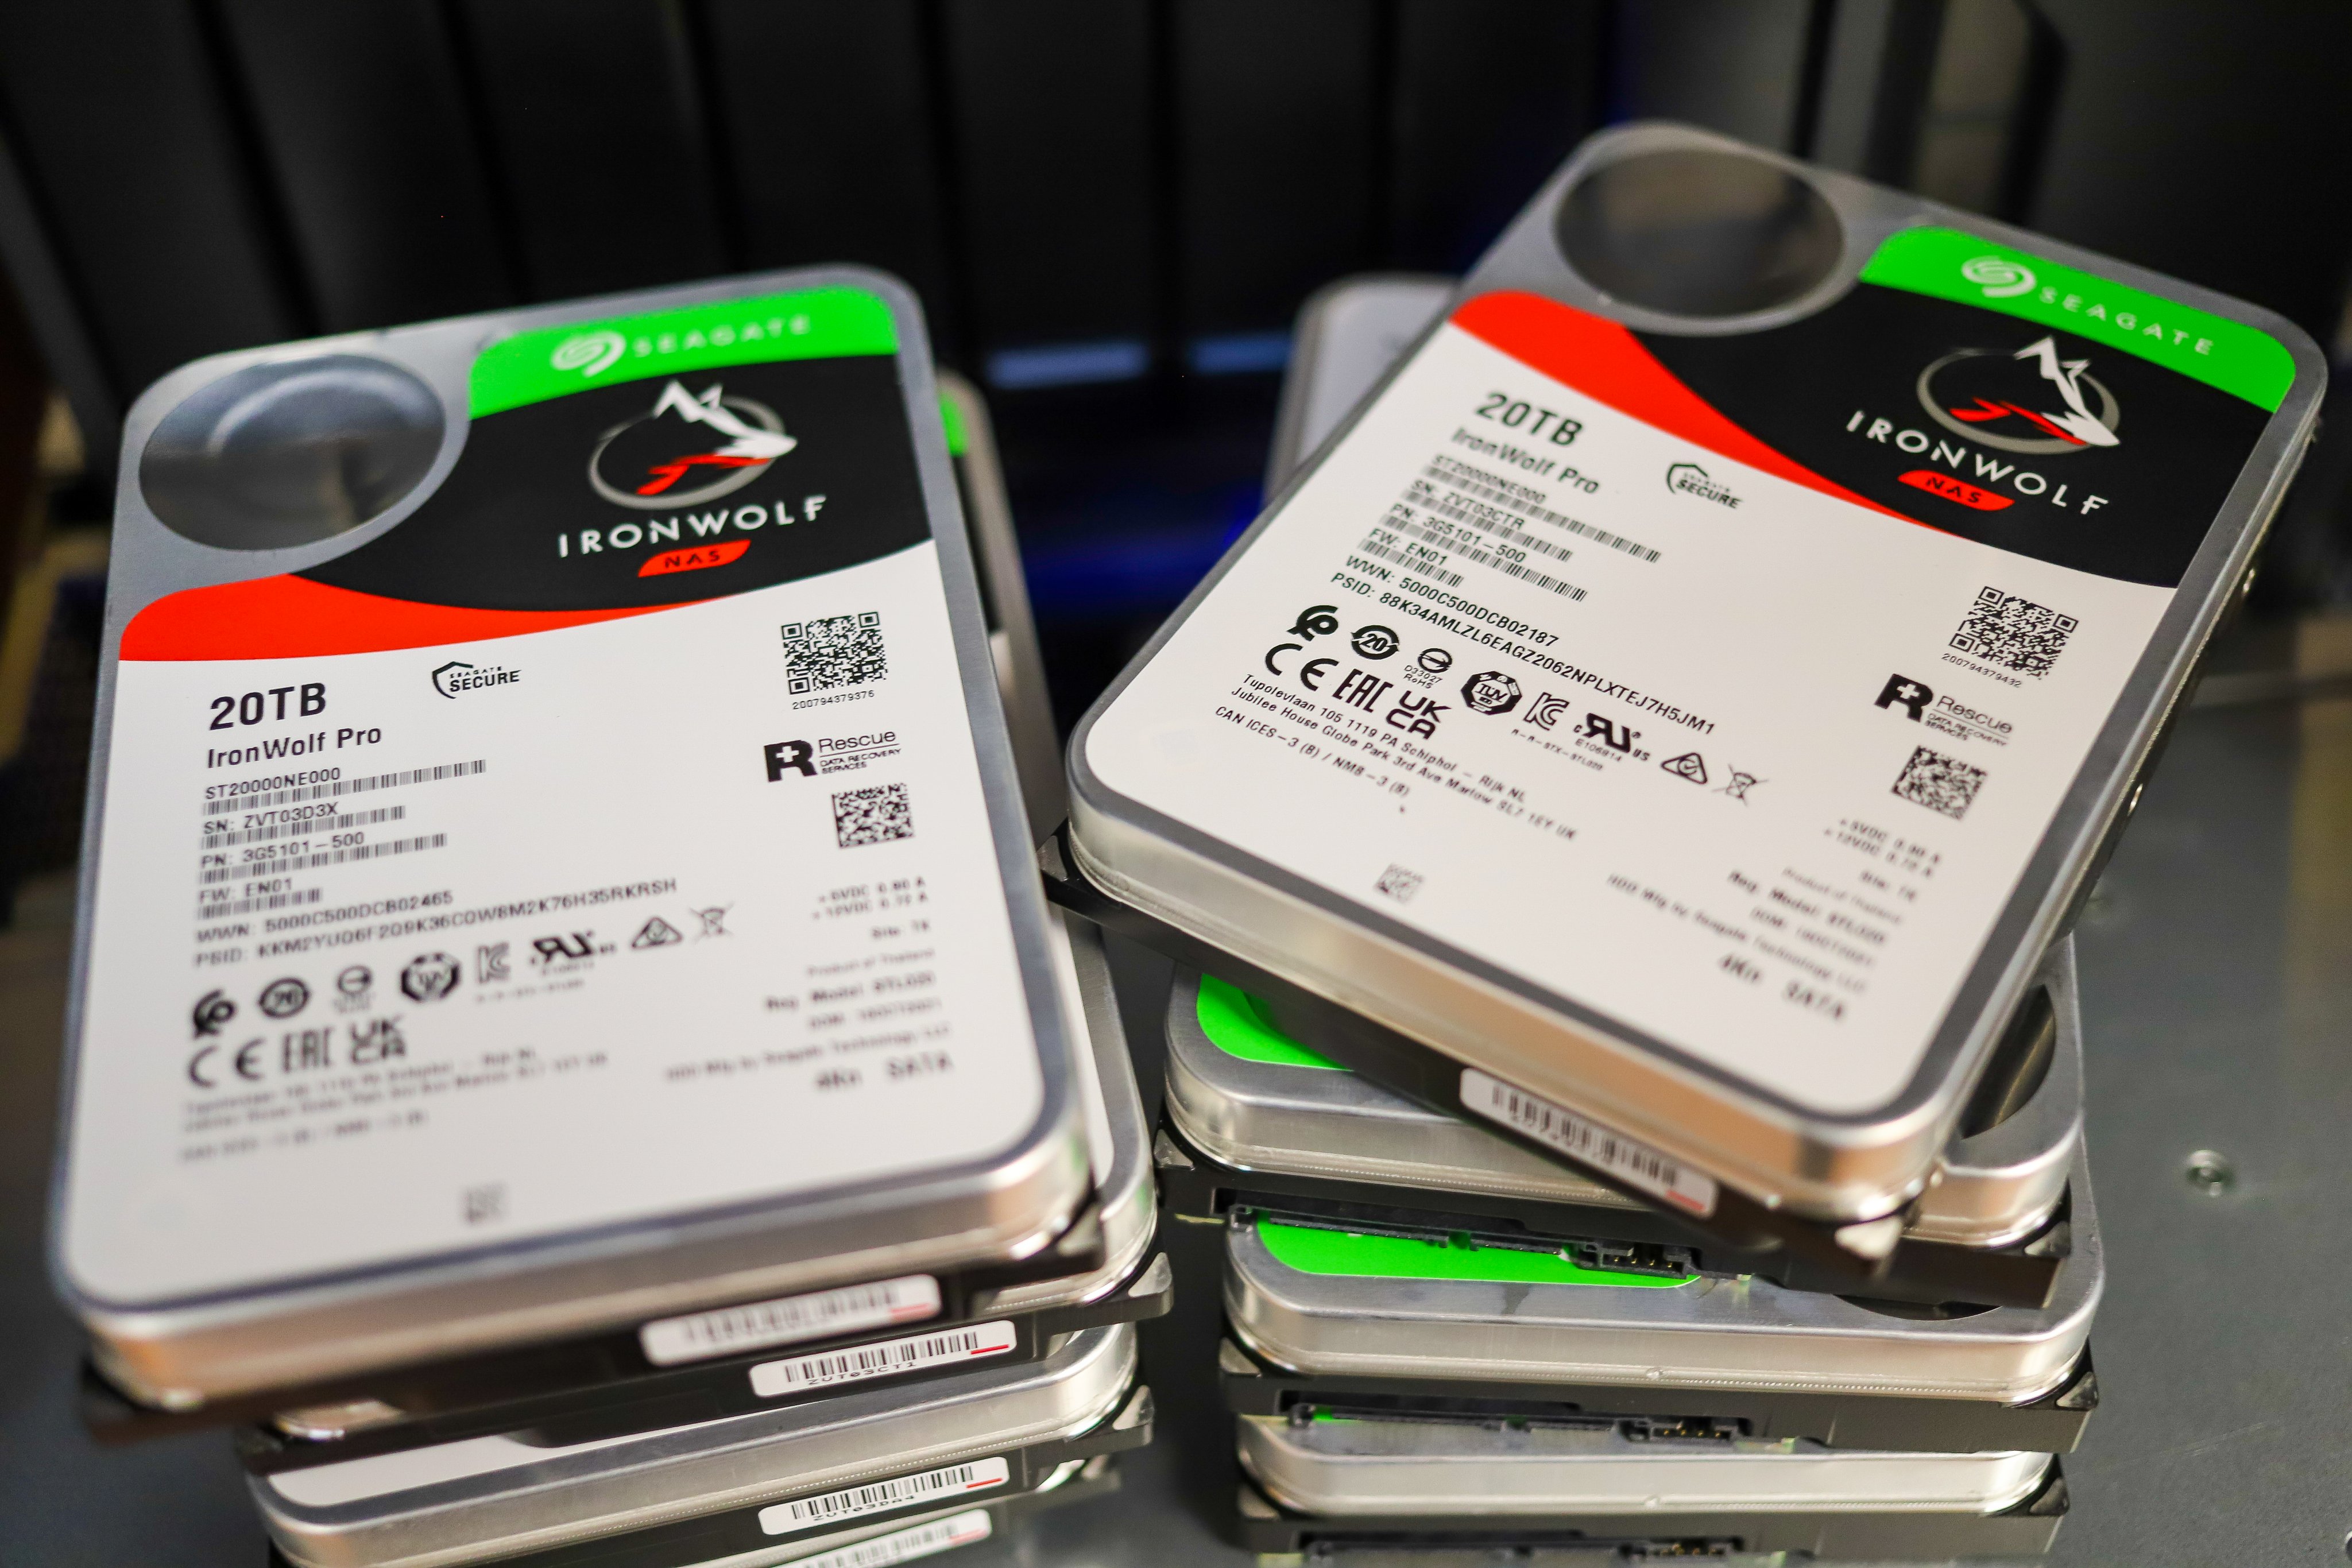 Klassificer Bloodstained I første omgang StorageReview.com on Twitter: "The @Seagate IronWolf Pro 20TB is the  industry's largest capacity NAS hard drive - designed for high-volume  workloads with faster transfer speeds. Read more about this massive drive in